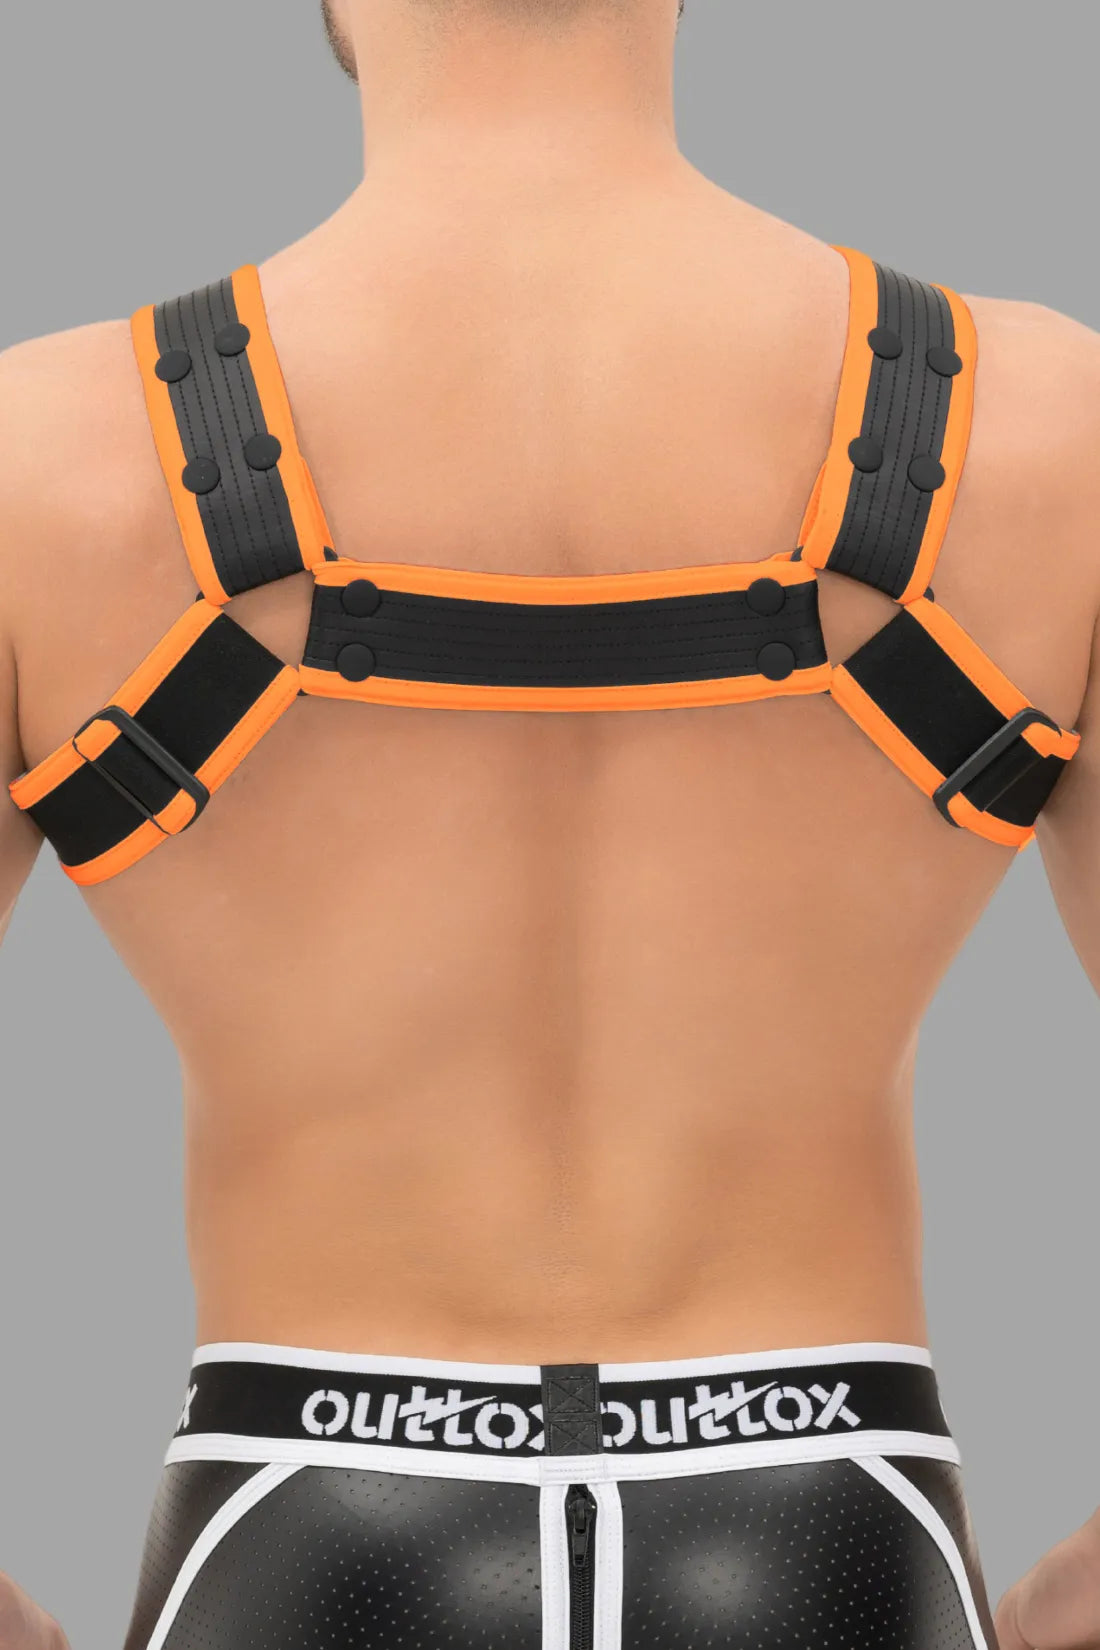 Outtox. Bulldog Harness with Snaps. Black and Orange